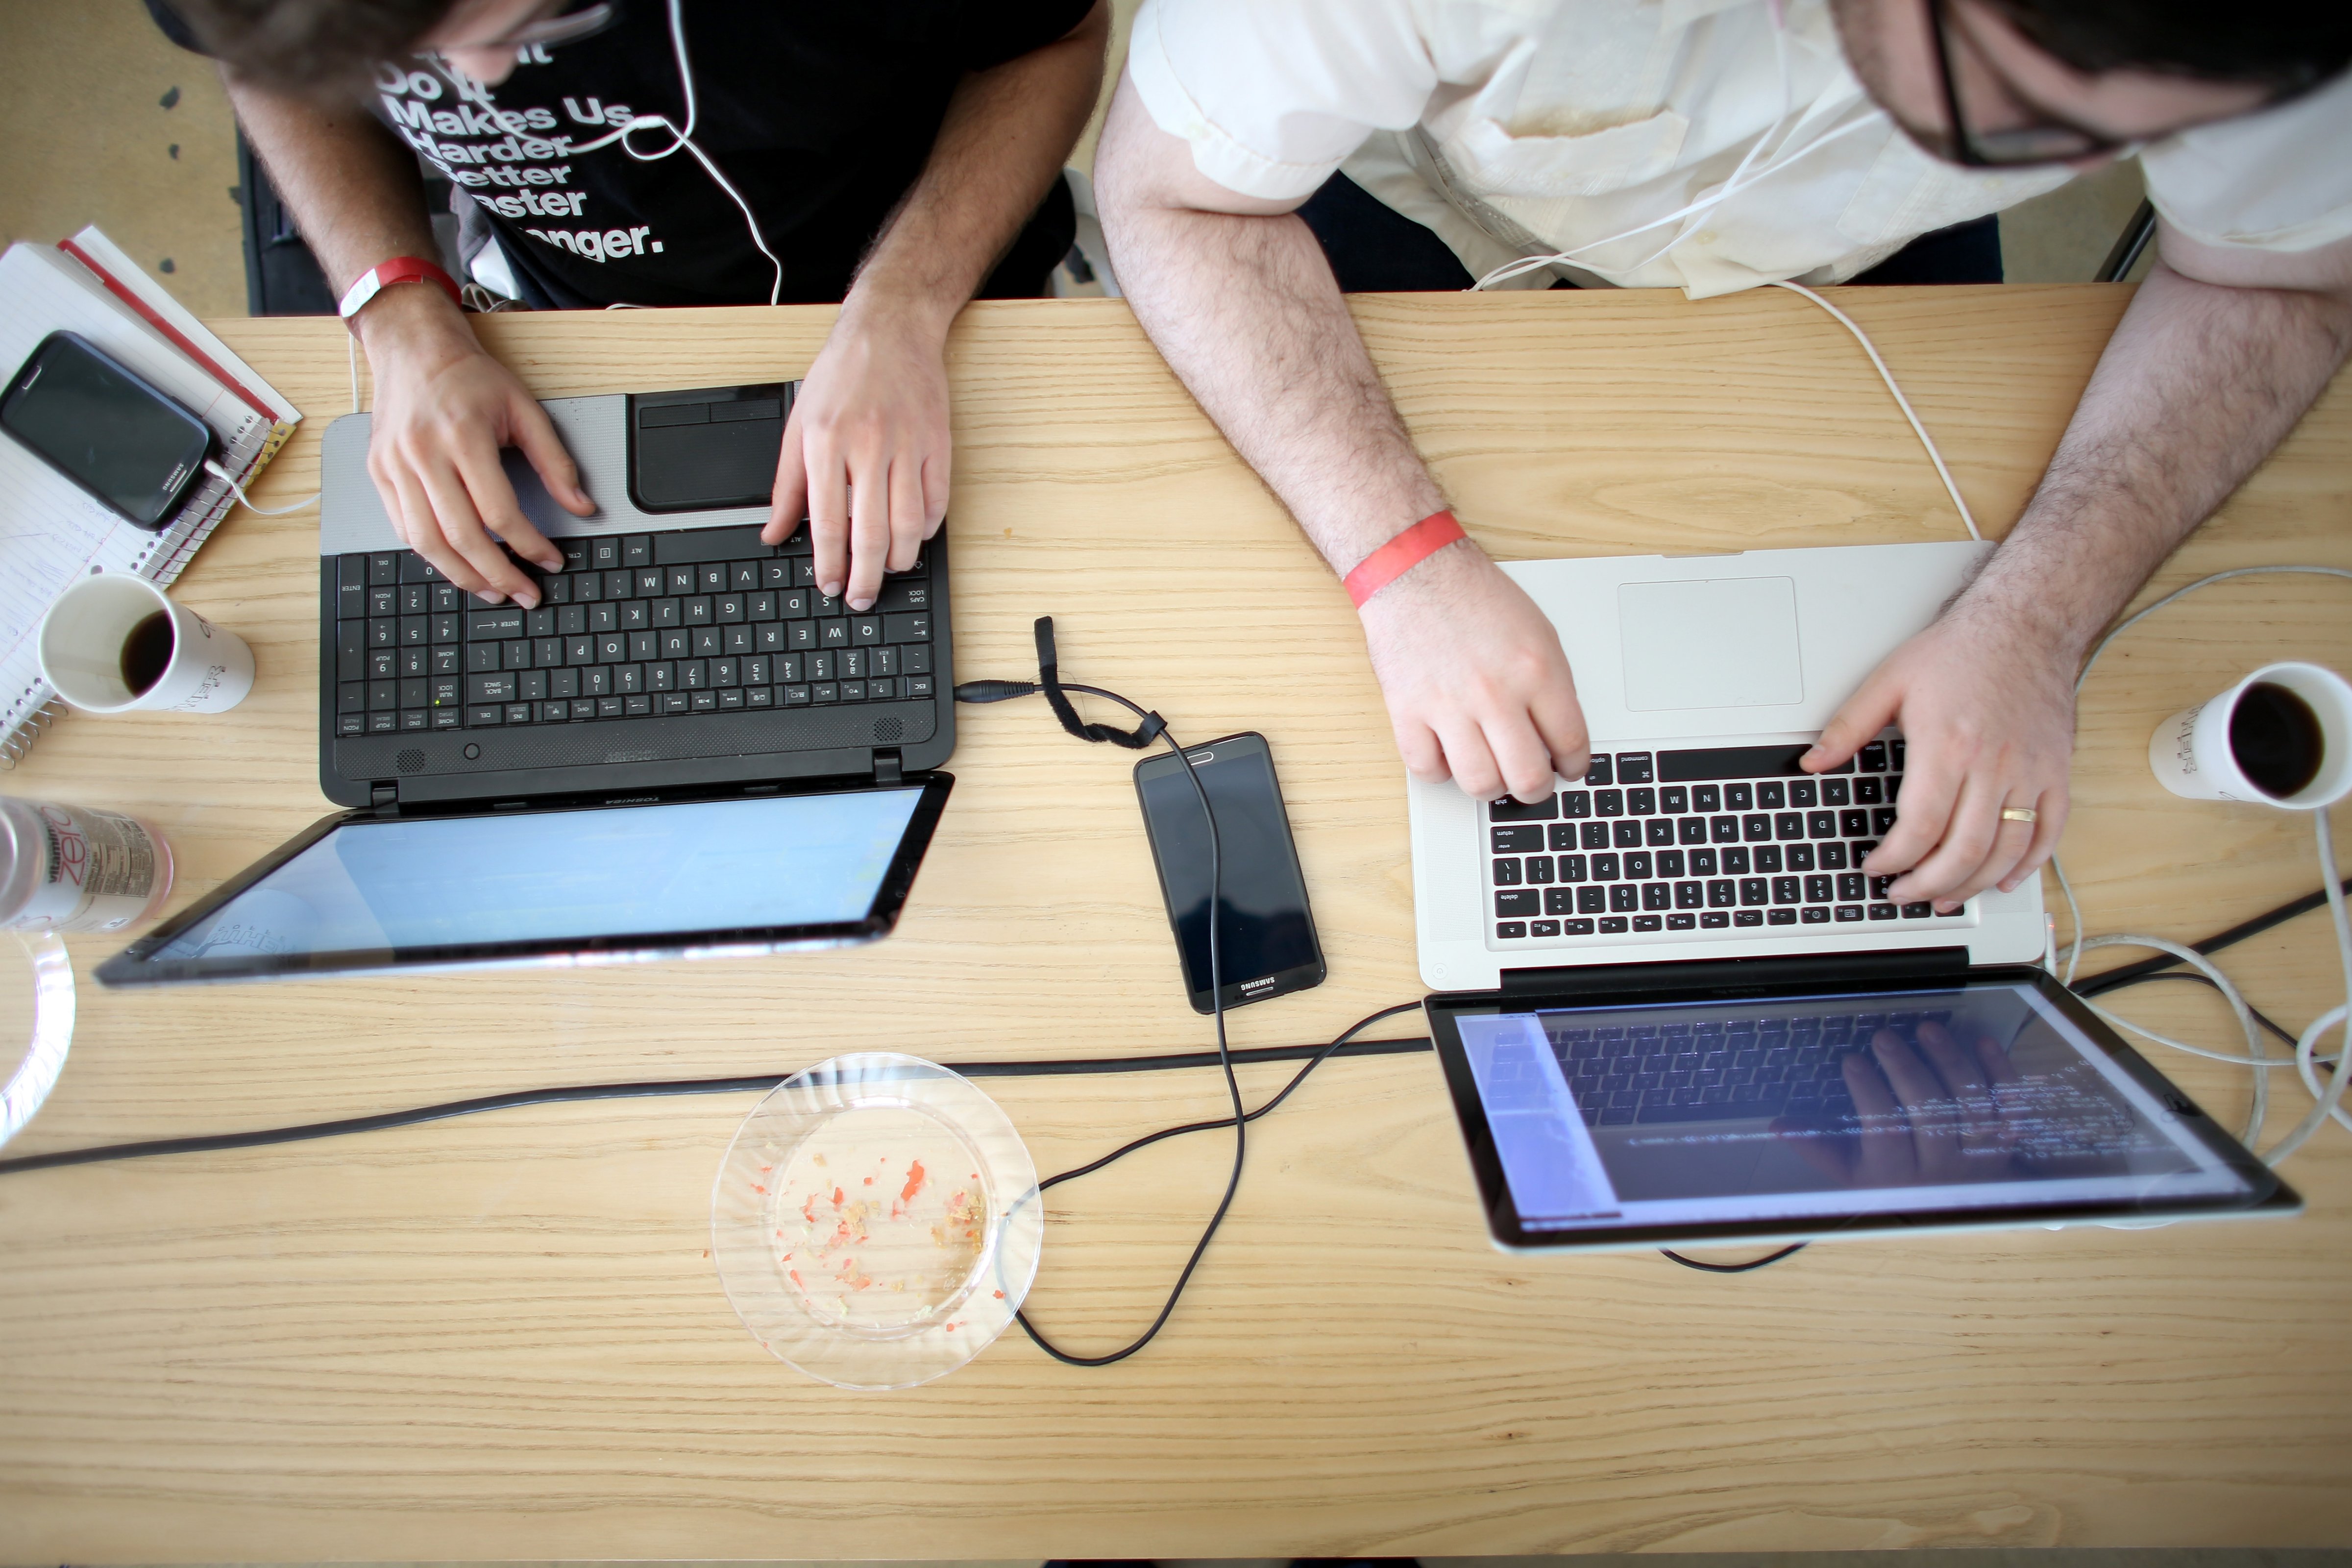 Miguel Chateloin  (L) and Lazaro Gamio (R) use their computers to write code that would allow people living in Cuba to use email to post to blogs during the Hackathon for Cuba event on Febr. 1, 2014 in Miami. (Joe Raedle—Getty Images)